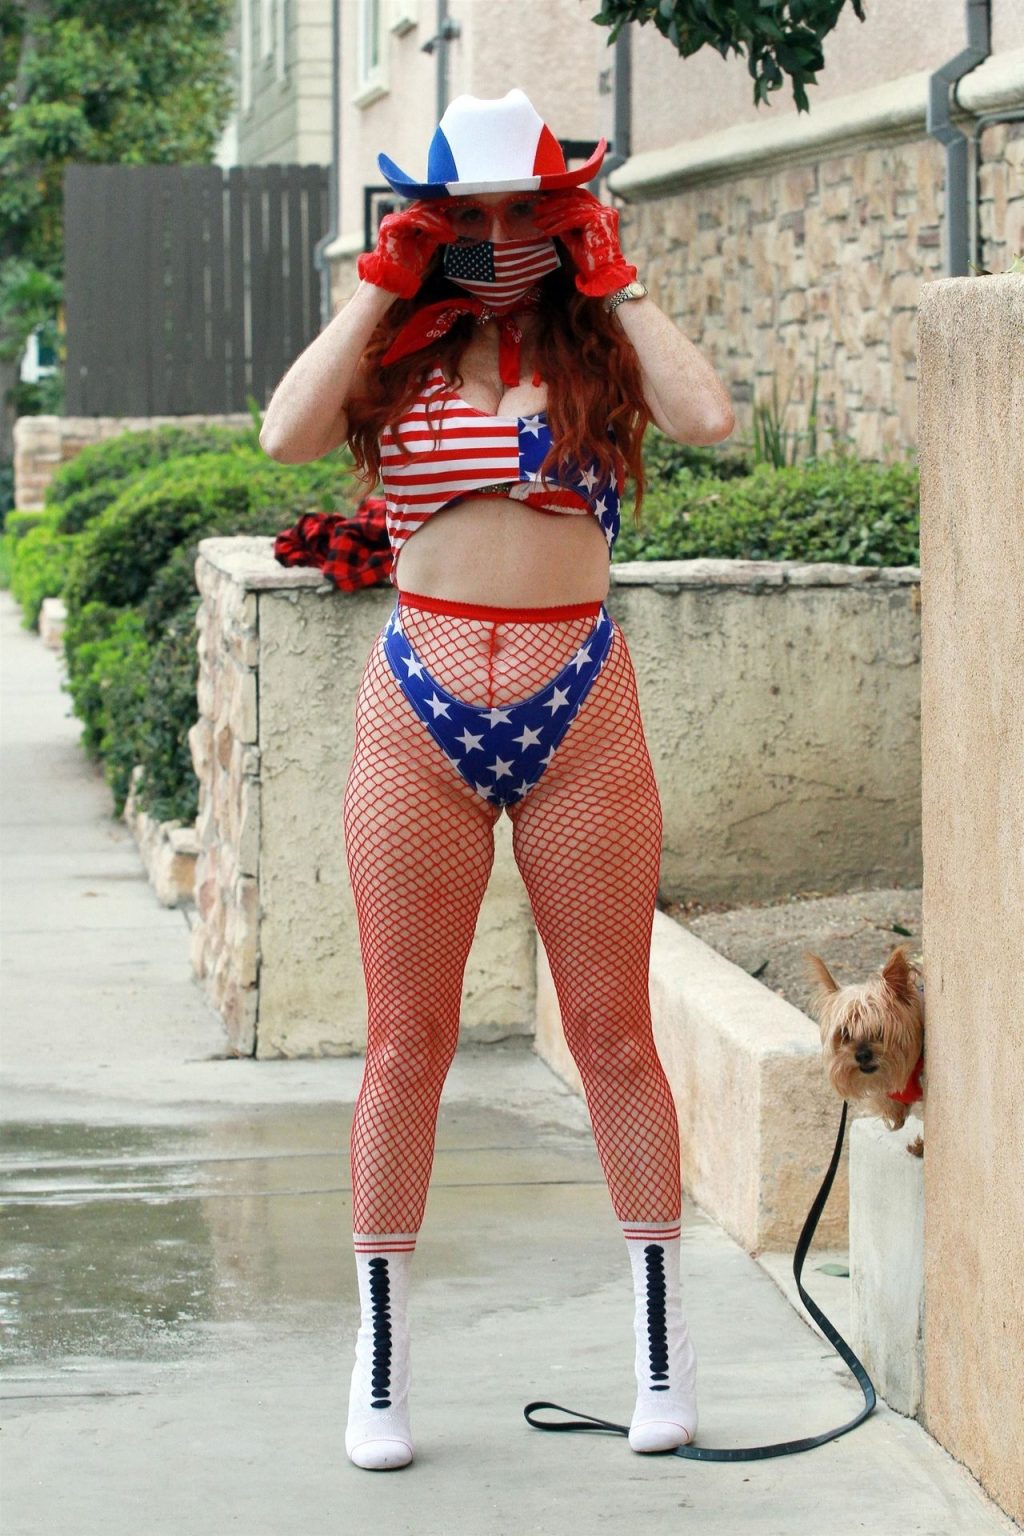 Phoebe Price Poses in a Patriotic Outfit (33 Photos)